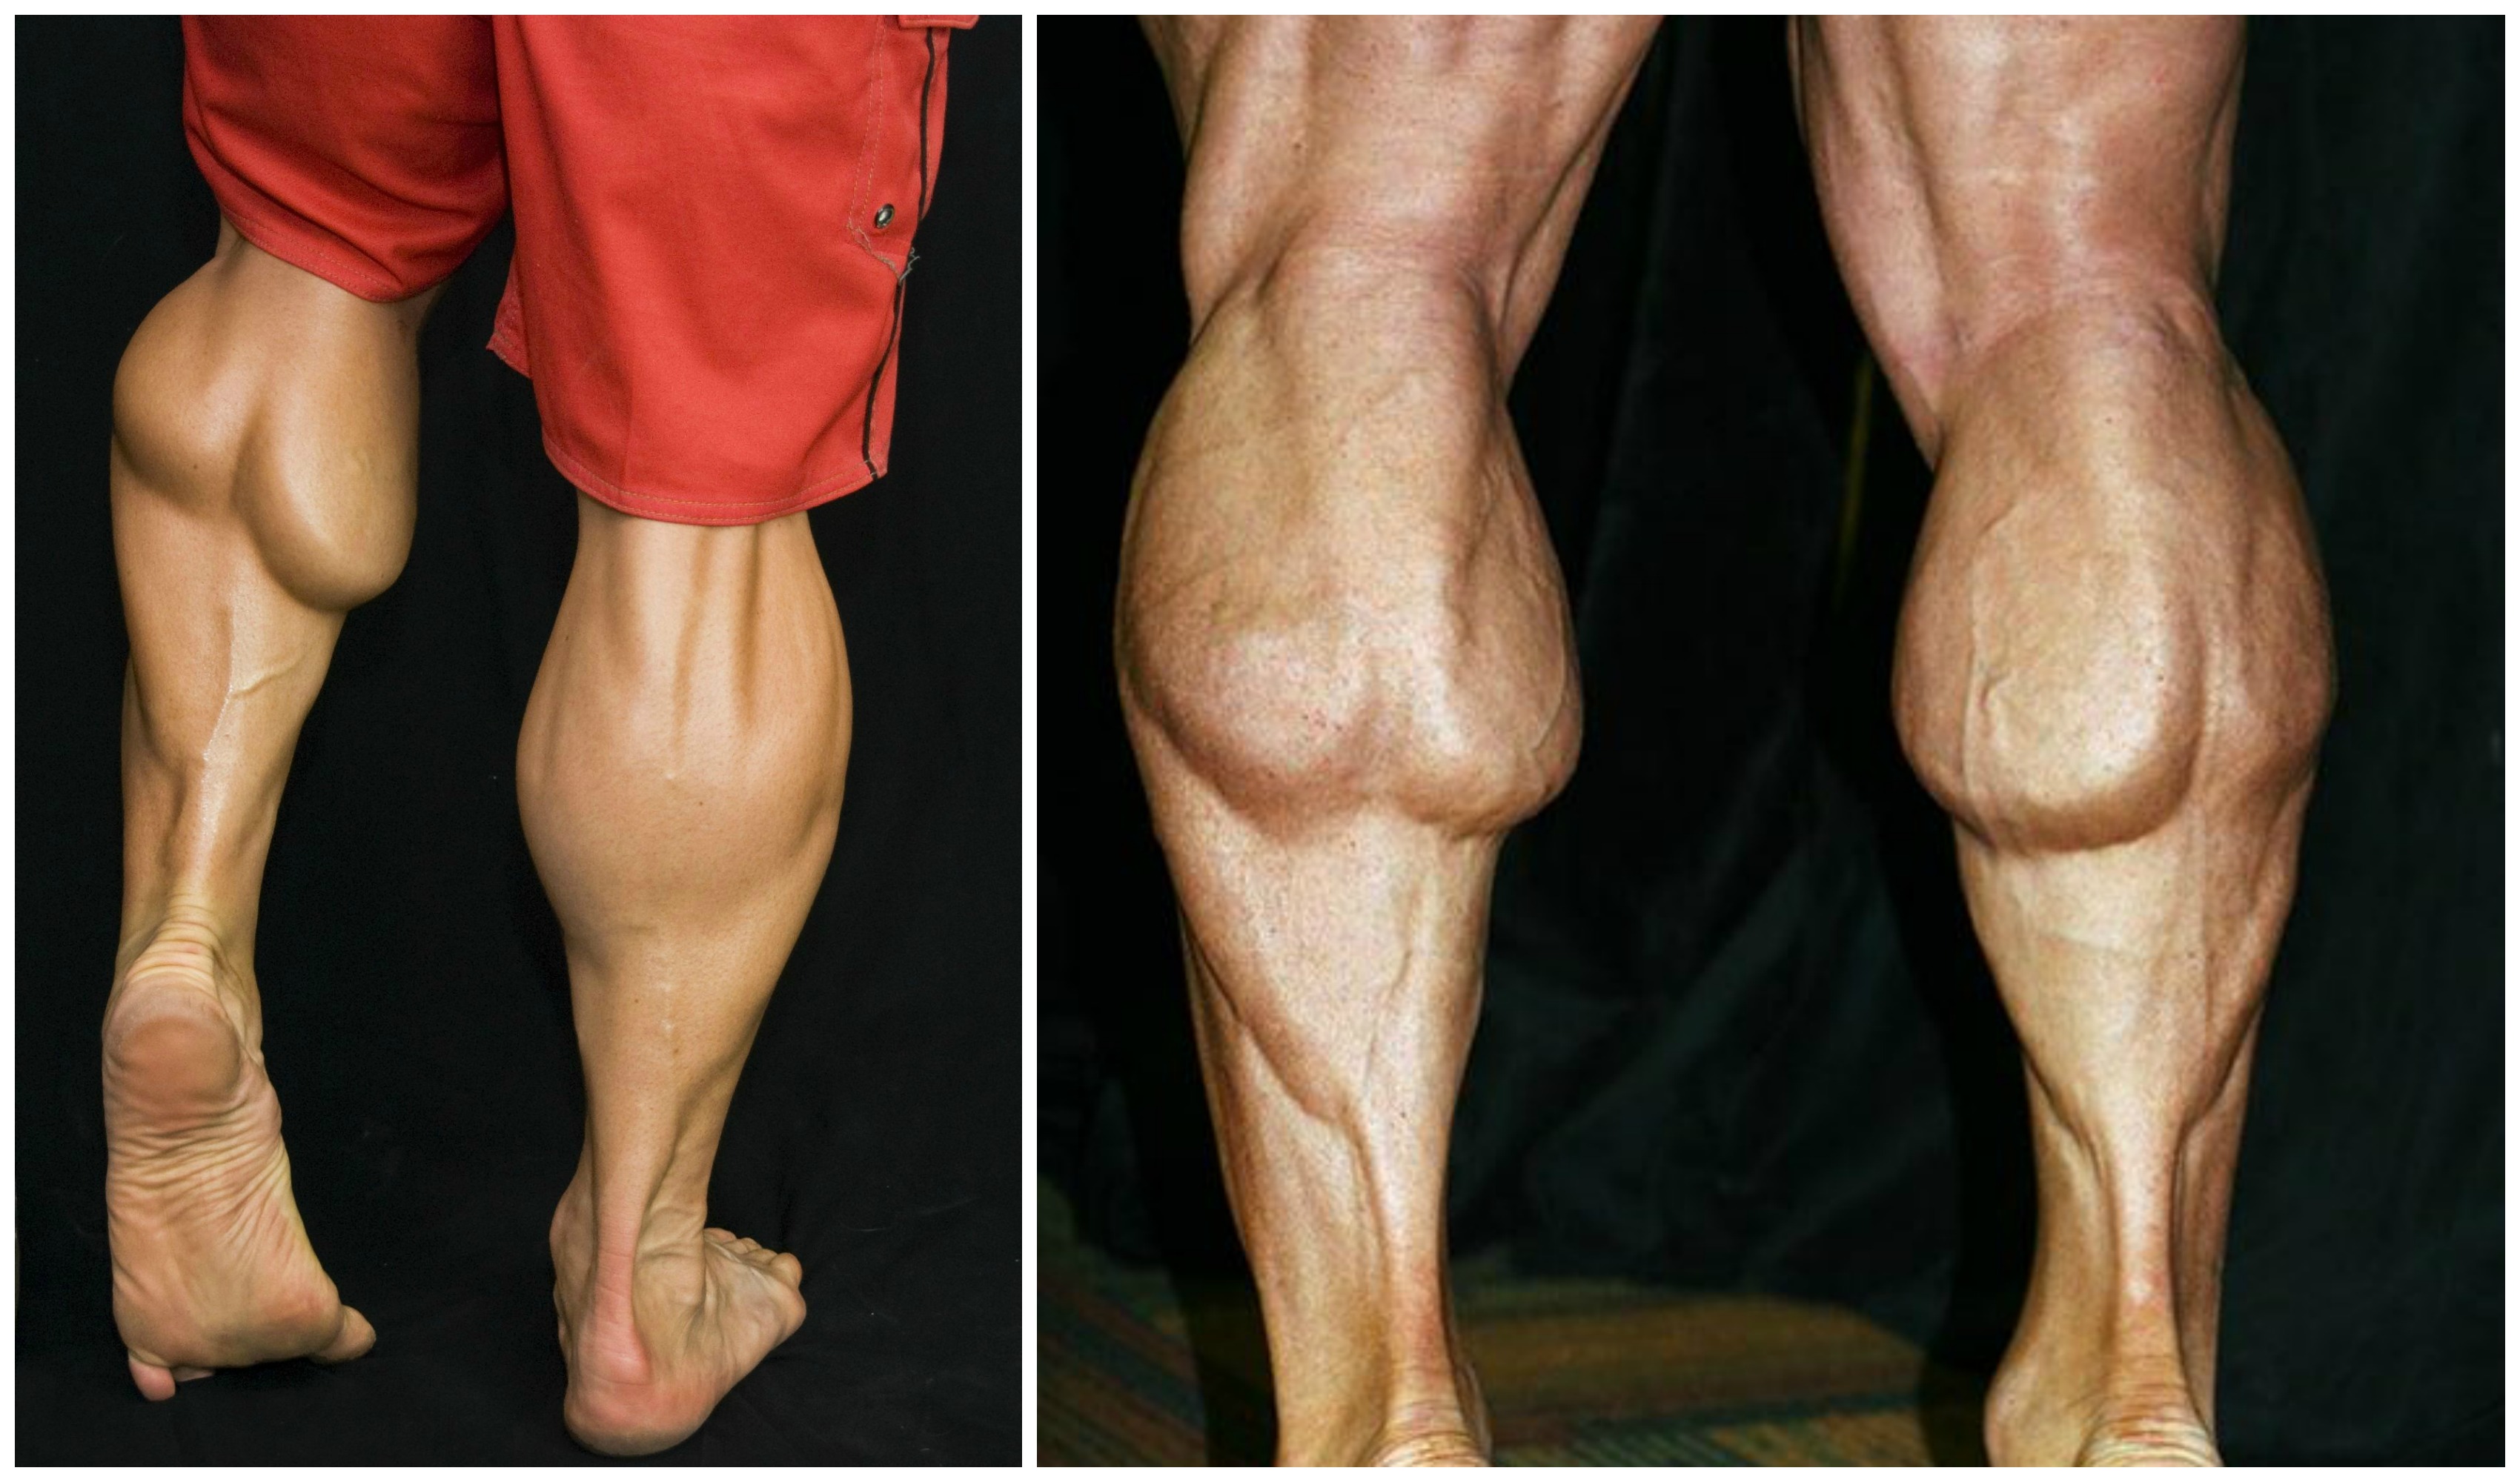 Common Calf Training Mistakes Most Guys With Small Calves Make